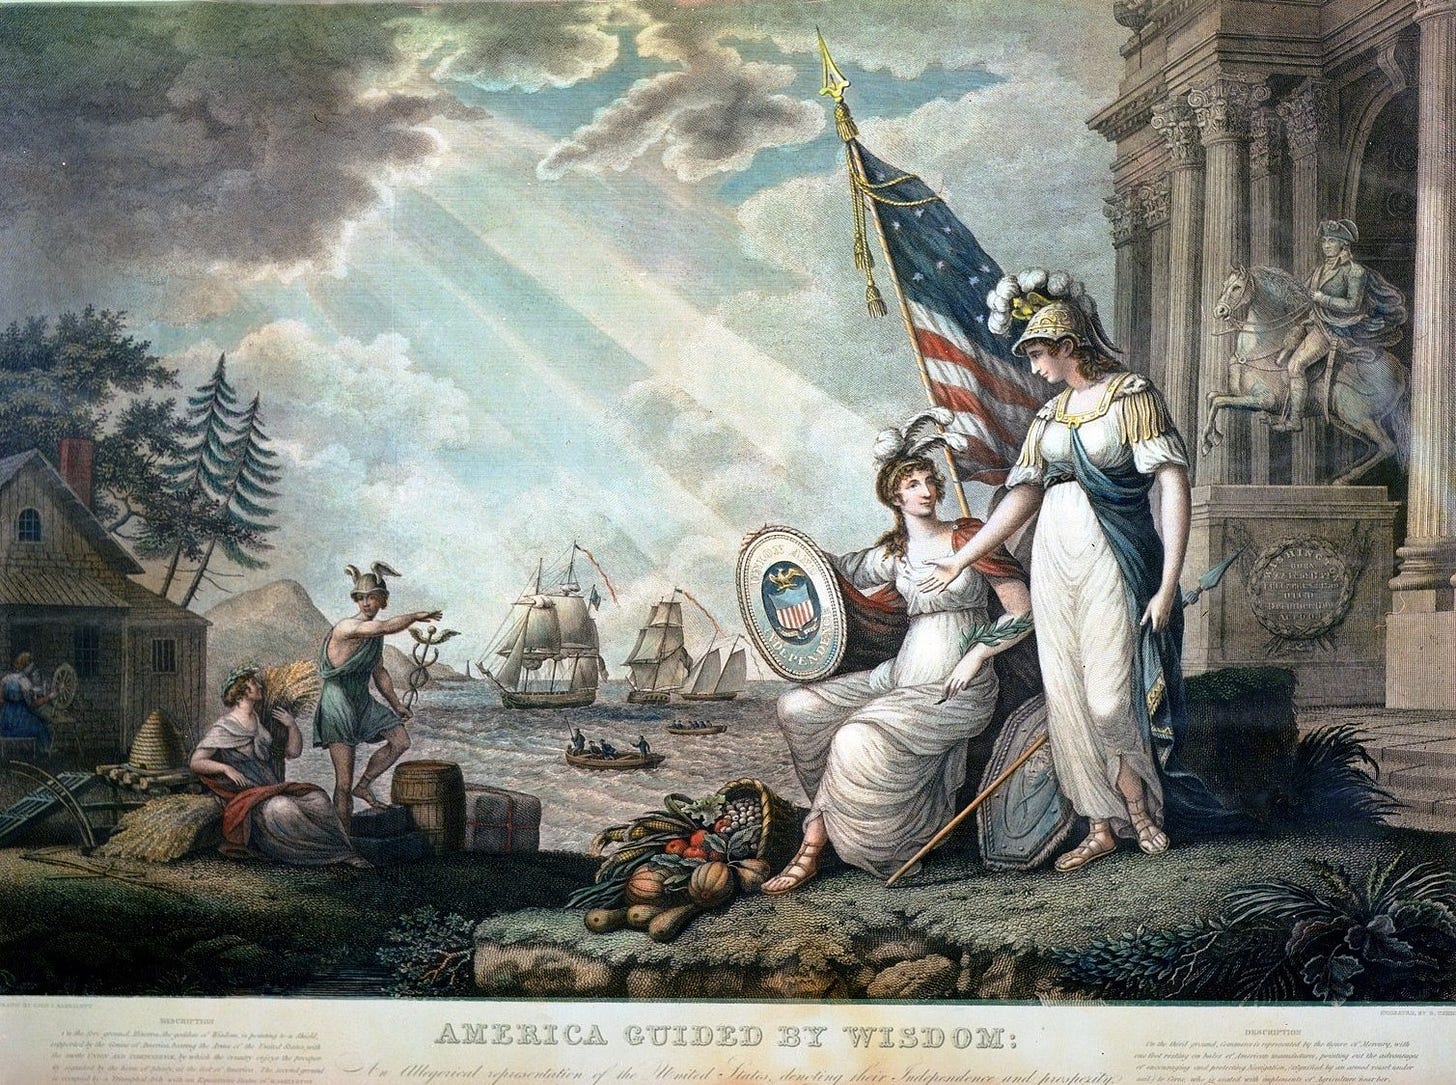 Painting by John James Baralett of the goddess of Wisdom, is pointing to a shield, supported by the Genius of America, bearing the arms of the United States, with the motto UNION AND INDEPENDENCE